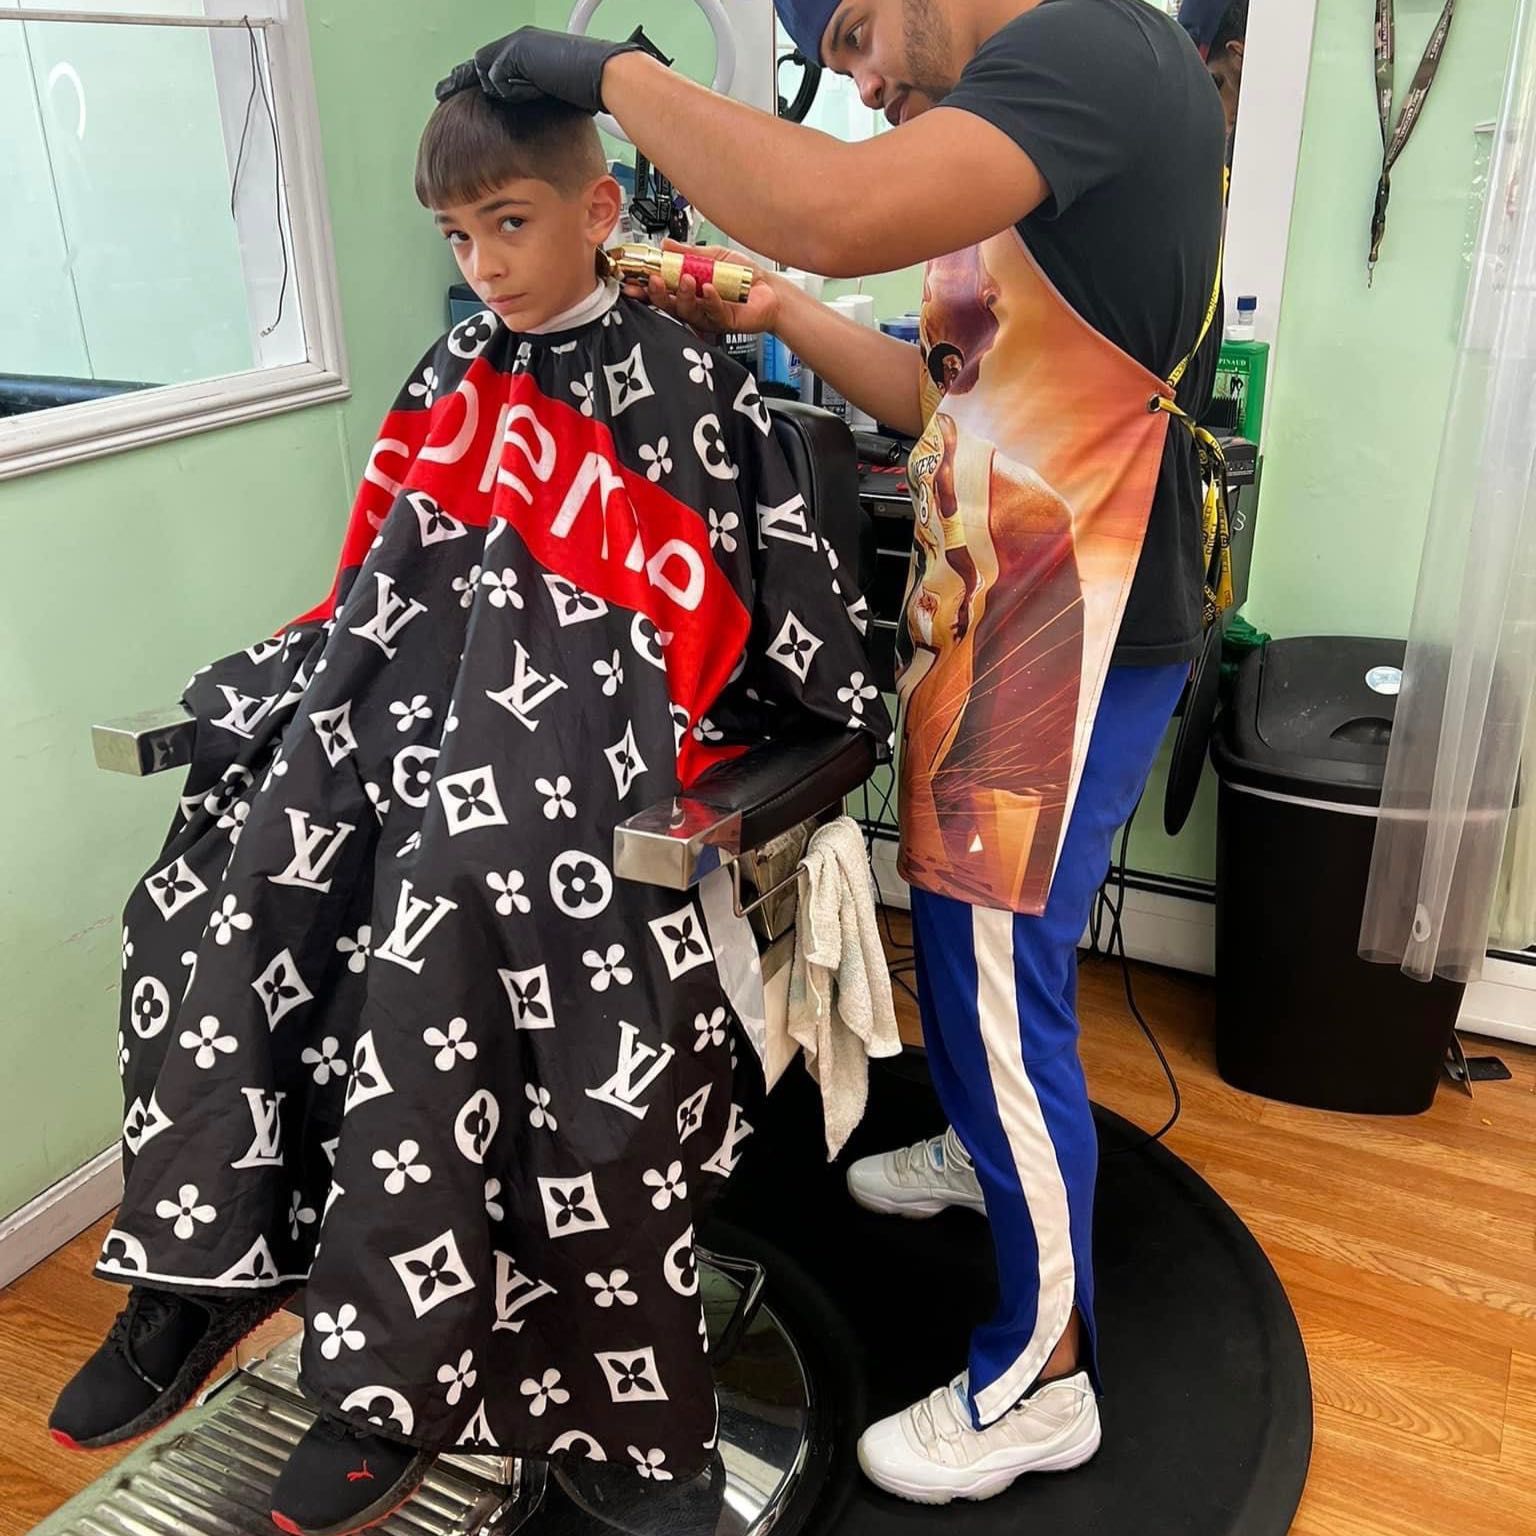 Kids under 10 years old. All type of  haircuts portfolio